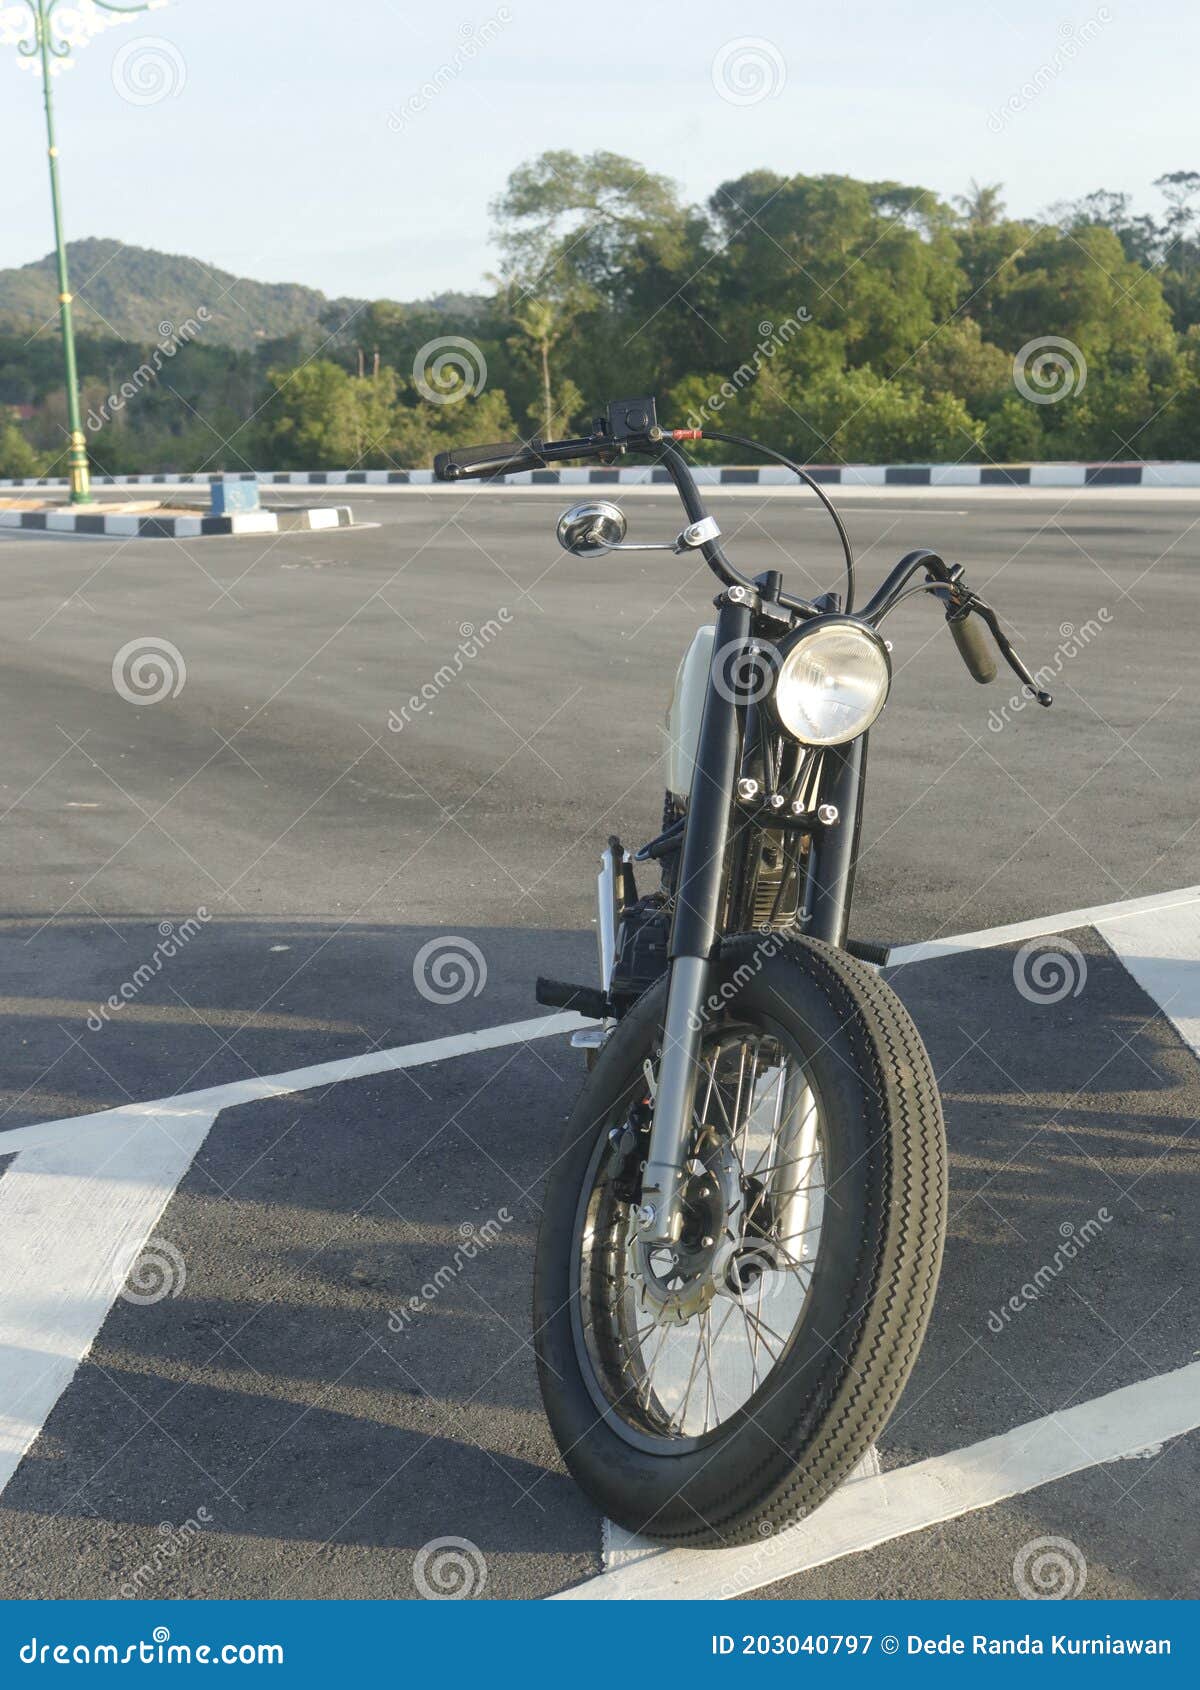 driving the motorbike is pasion